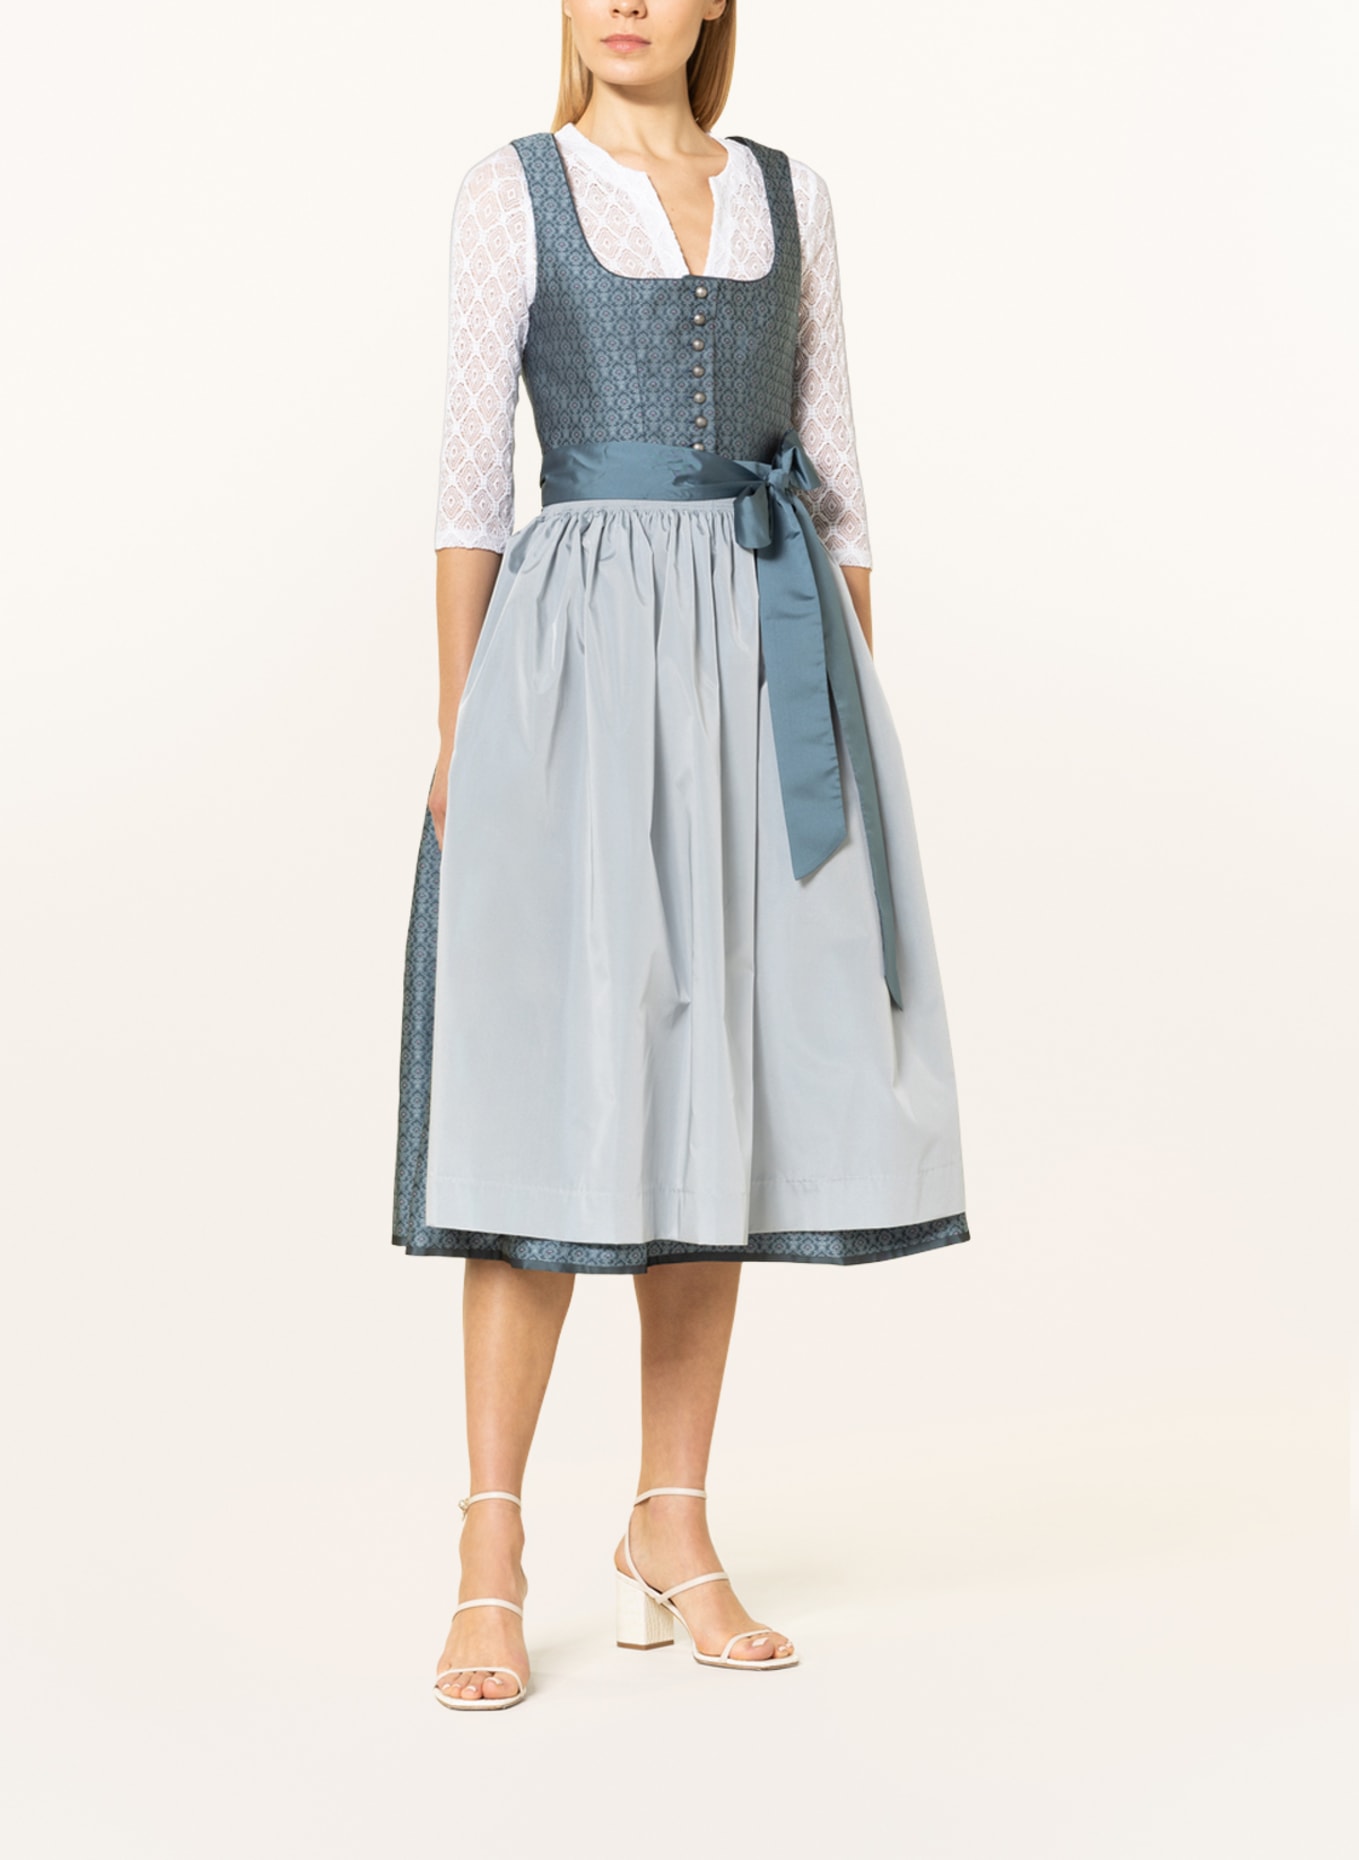 WALDORFF Dirndl blouse made of lace with 3/4 sleeves, Color: WHITE (Image 4)